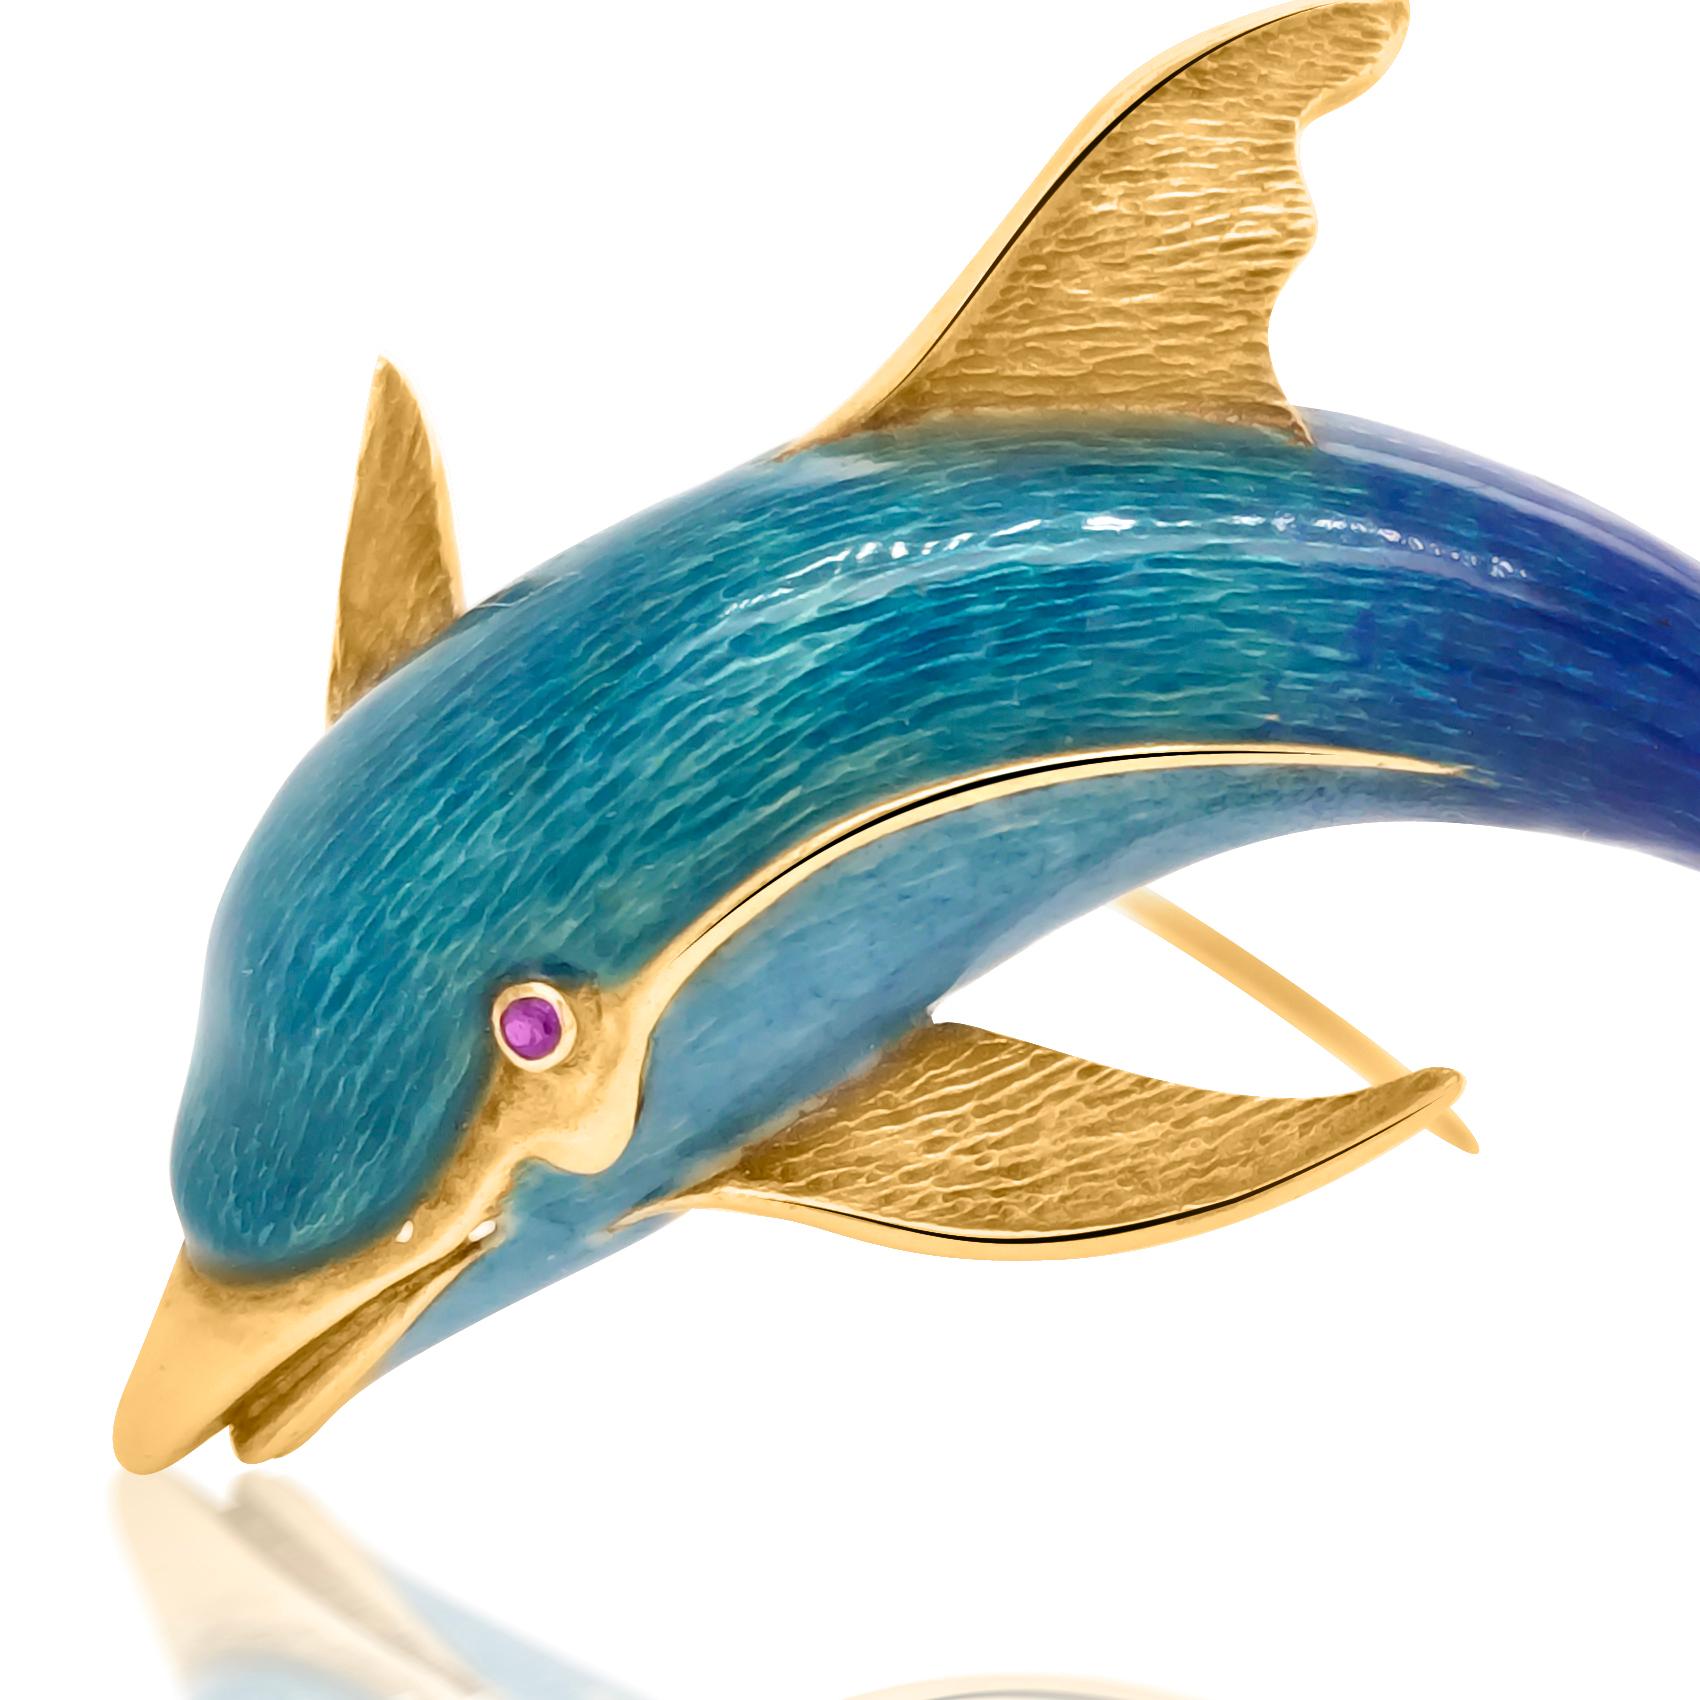 This adorable dolphin pin brooch is crafted in solid 18-karat yellow gold, weighing 16.68 grams and measuring 63mm long x 41mm wide. The eye is an approx. 0.02-carat ruby. Highlighting its body ornately with blue and ultramarine blue enamel and gold